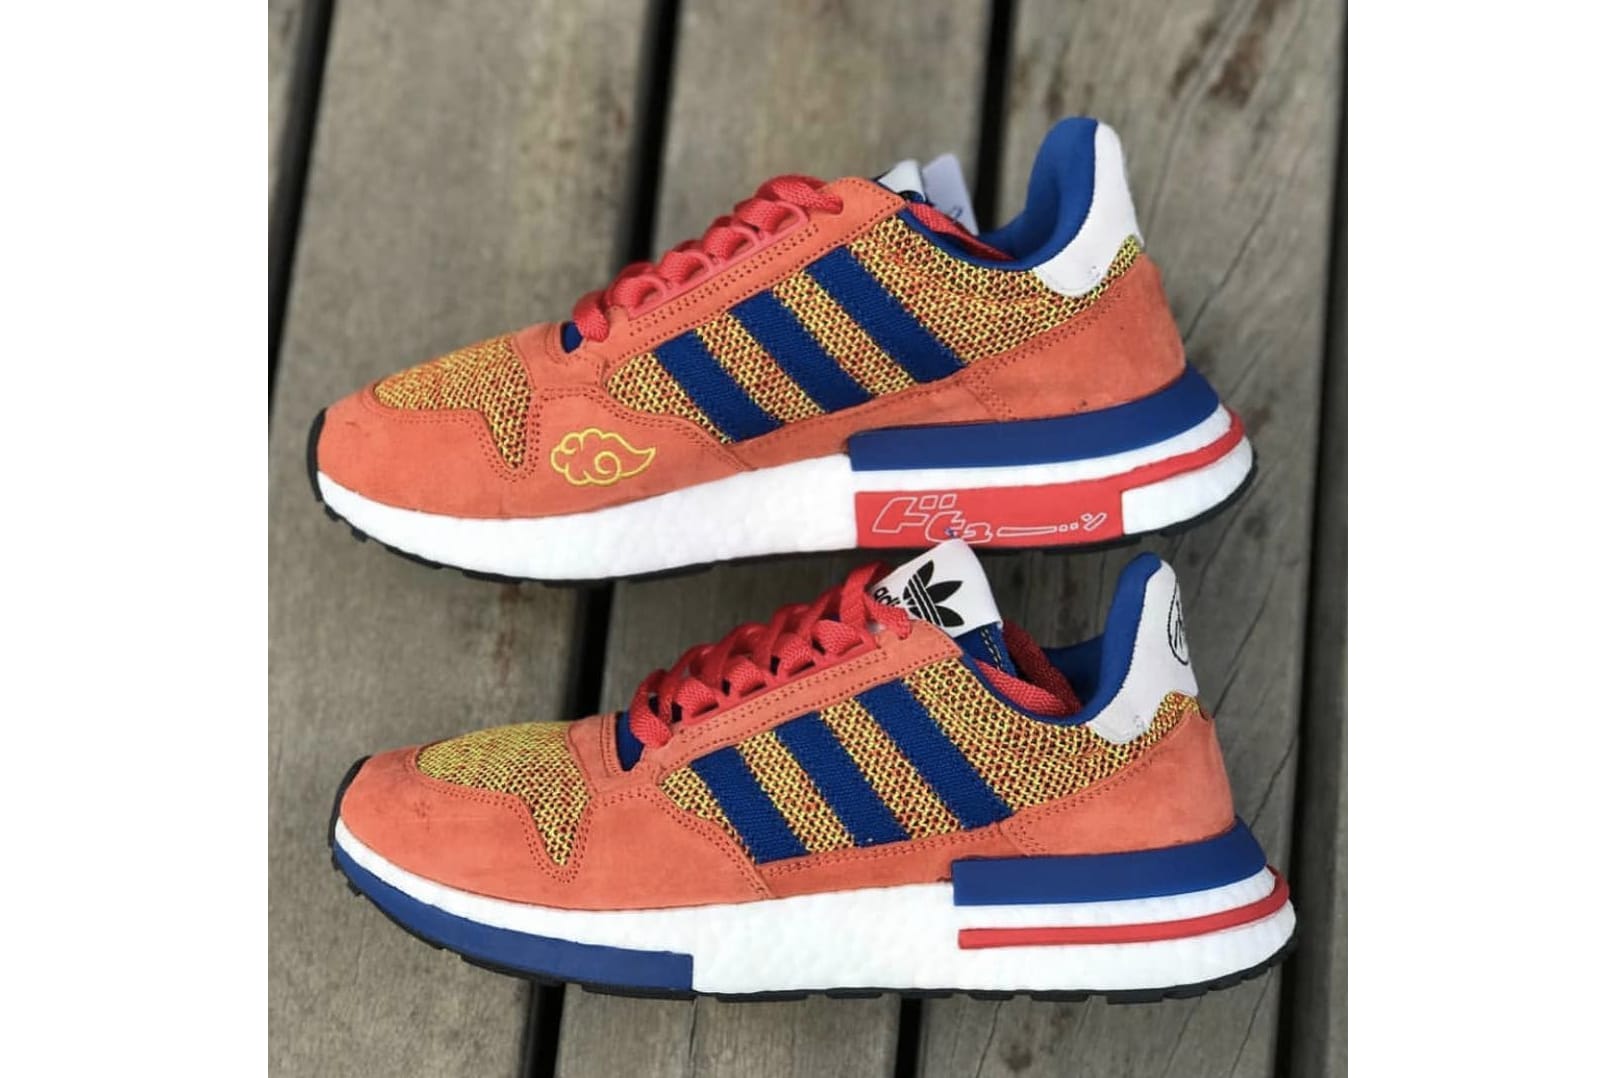 Dragon Ball Zx Adidas Zx 500 Rm Online Sale, UP TO 67% OFF